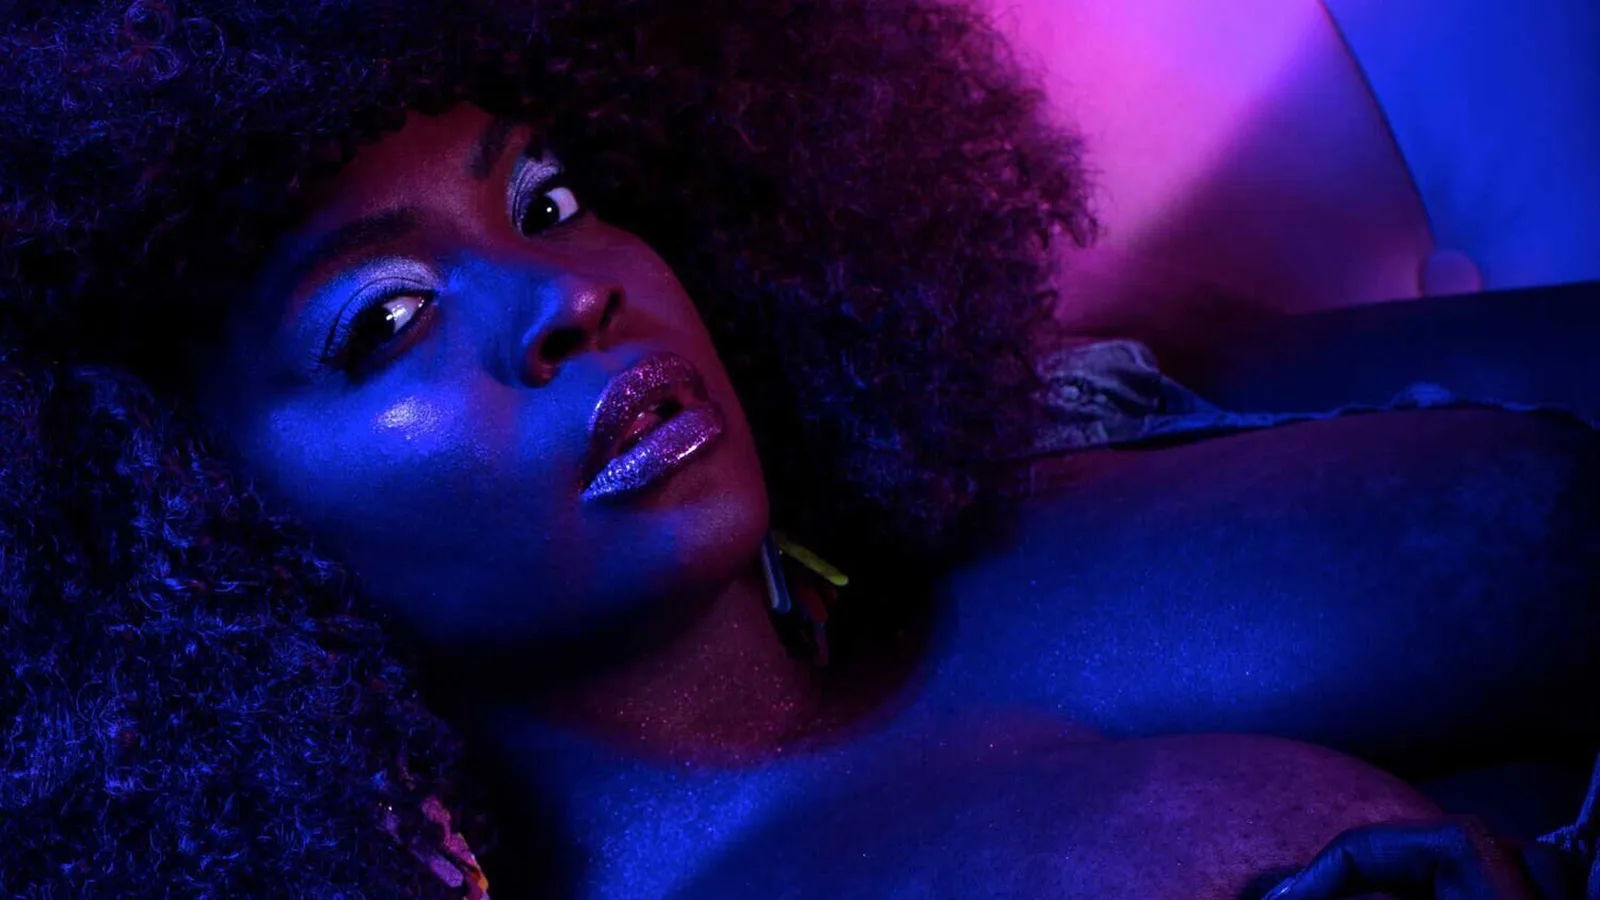 A closeup of burlesque performer Ms. Briq House in a reclined position. There's purple and indigo light illuminating her